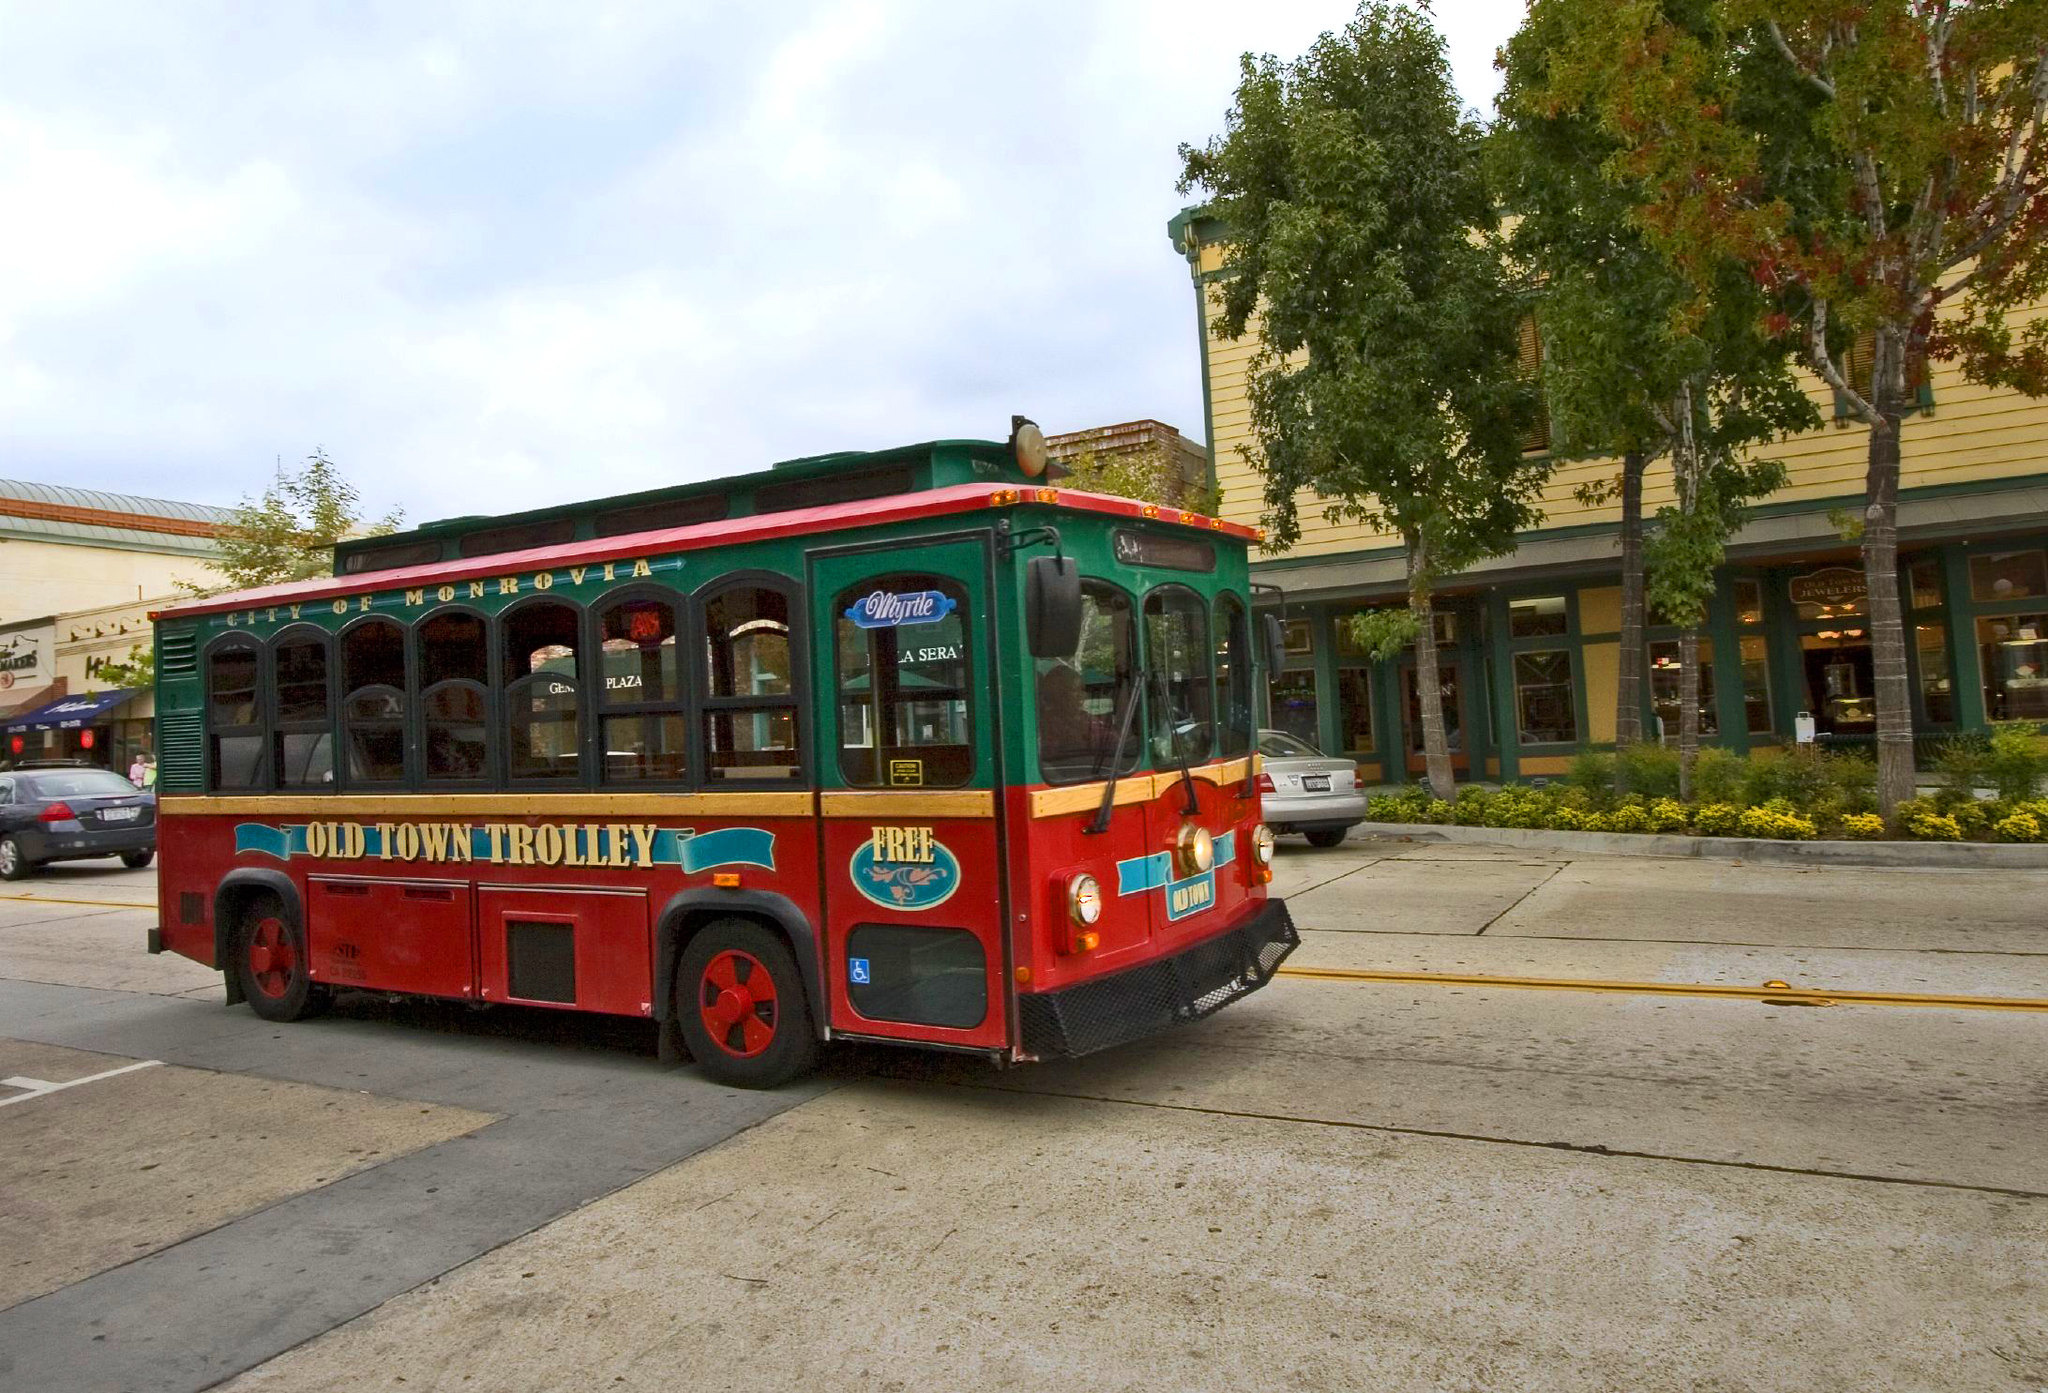 Trolley in Old Town, Monrovia